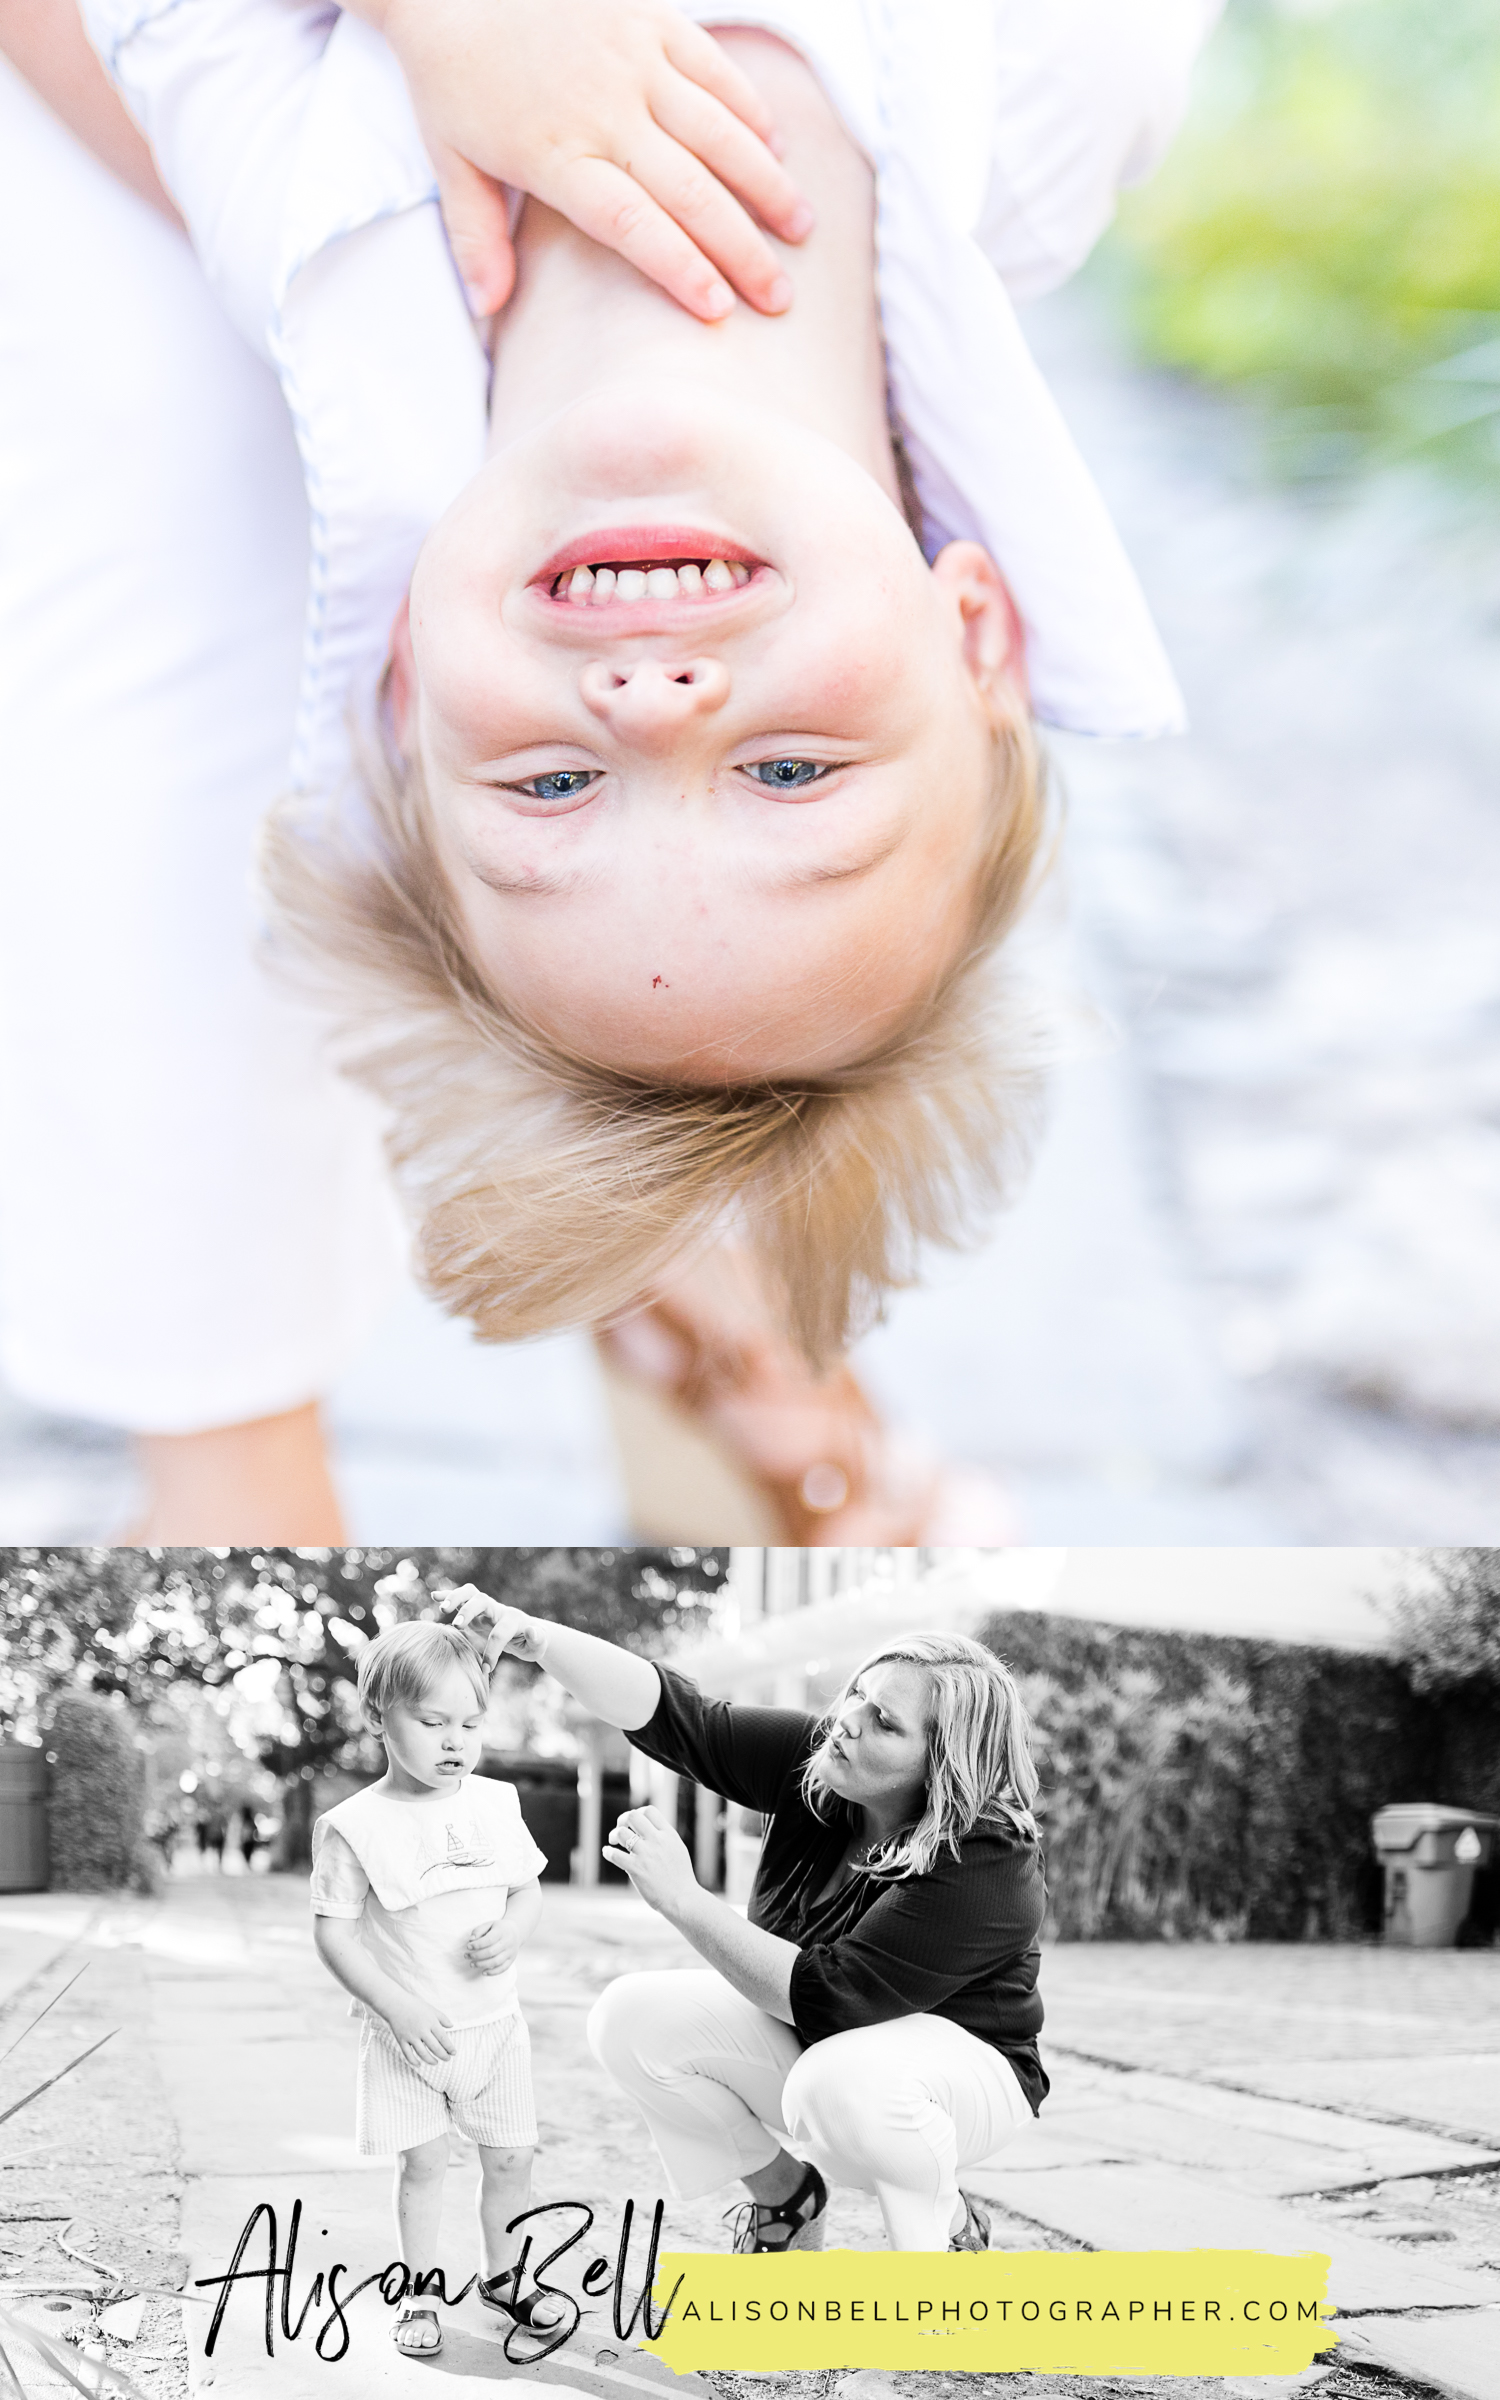 Historic charleston, south carolina family photo sessions by alison bell photographer